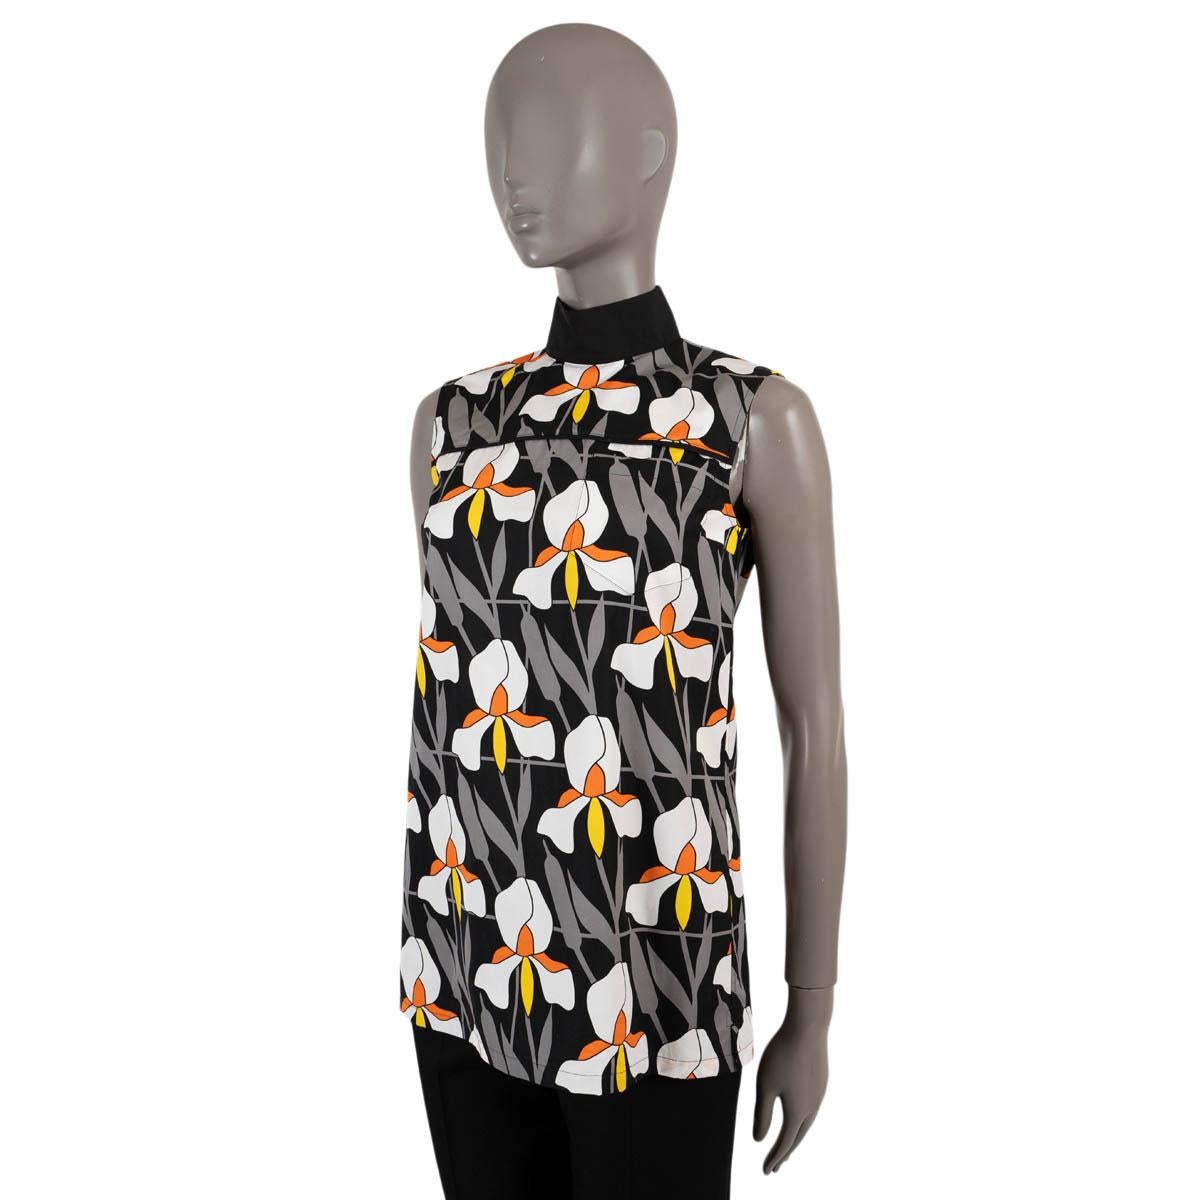 100% authentic Prada sleeveless blouse in black, grey, white, orange and yellow floral-print cotton (100%). Features a mock neck and a chest pocket. Opens with buttons in the back and is unlined. Has been worn and is in excellent condition. 

2020